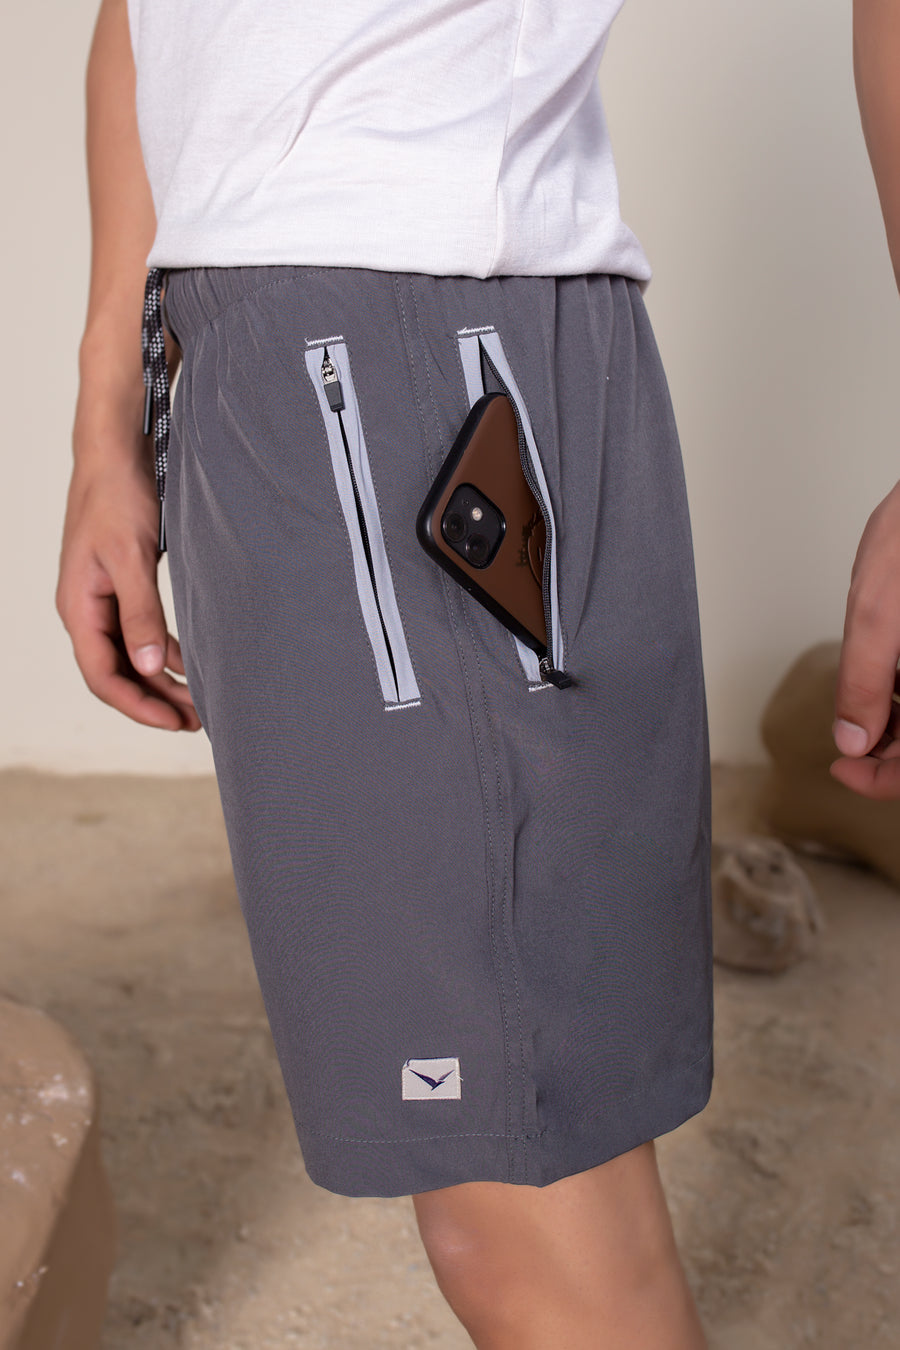 Men's Flight Shorts in Dark Gray | VOLO Apparel | Designed so you can feel fly and completely secure, the Flight Shorts 2.0 are made with an ultralight micro stretch fabric that is quick drying and comes with a three zipper pocket design. The smart pocket tech makes it so your stuff won’t bounce when you do. Reinforced stitching so it can handle everything you will throw at it. The one short for your every adventure.